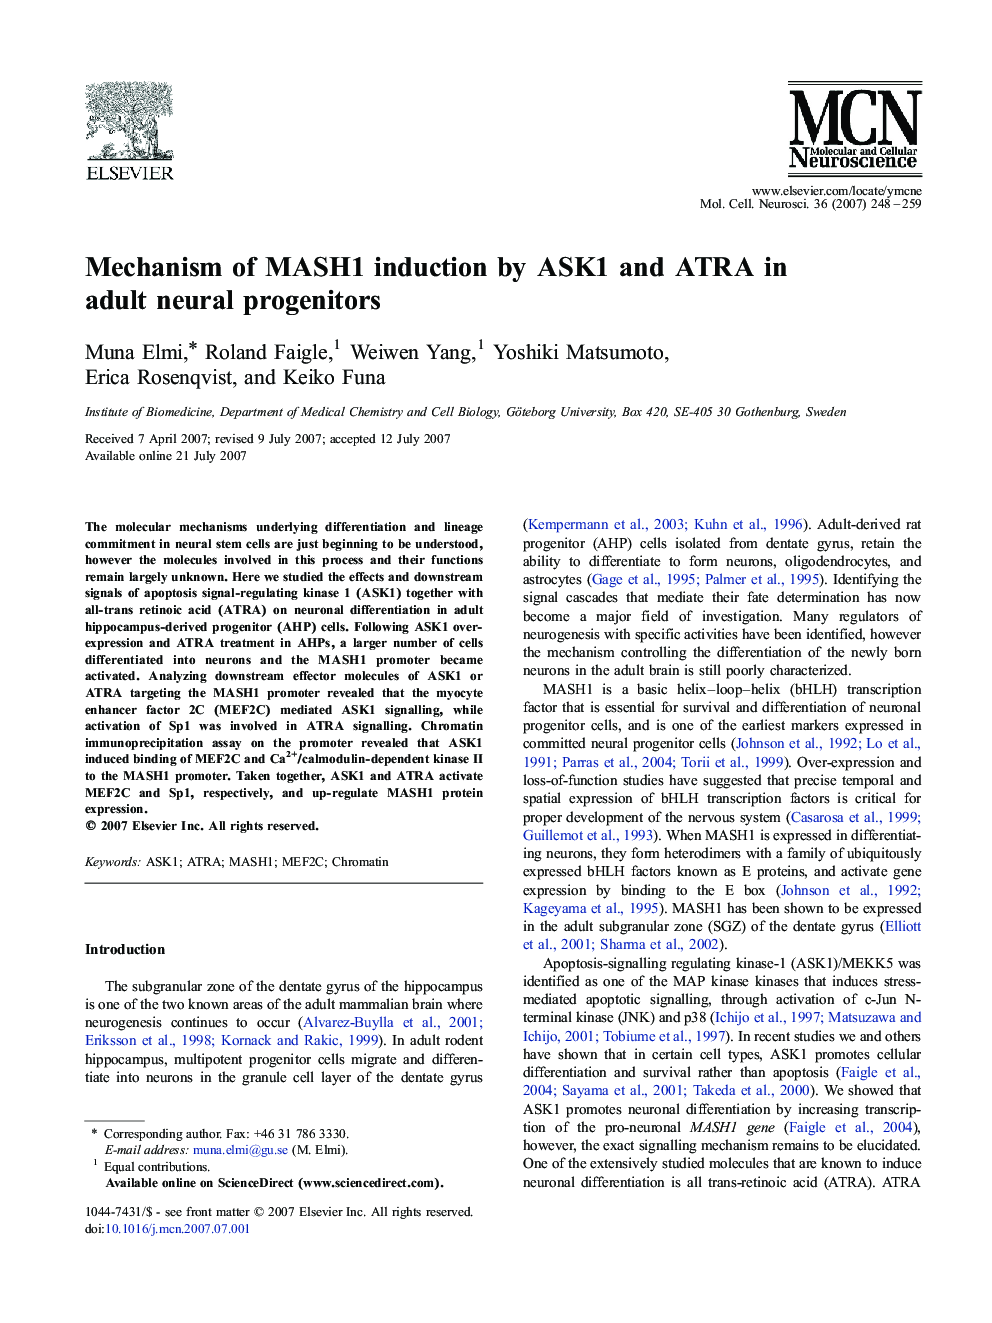 Mechanism of MASH1 induction by ASK1 and ATRA in adult neural progenitors